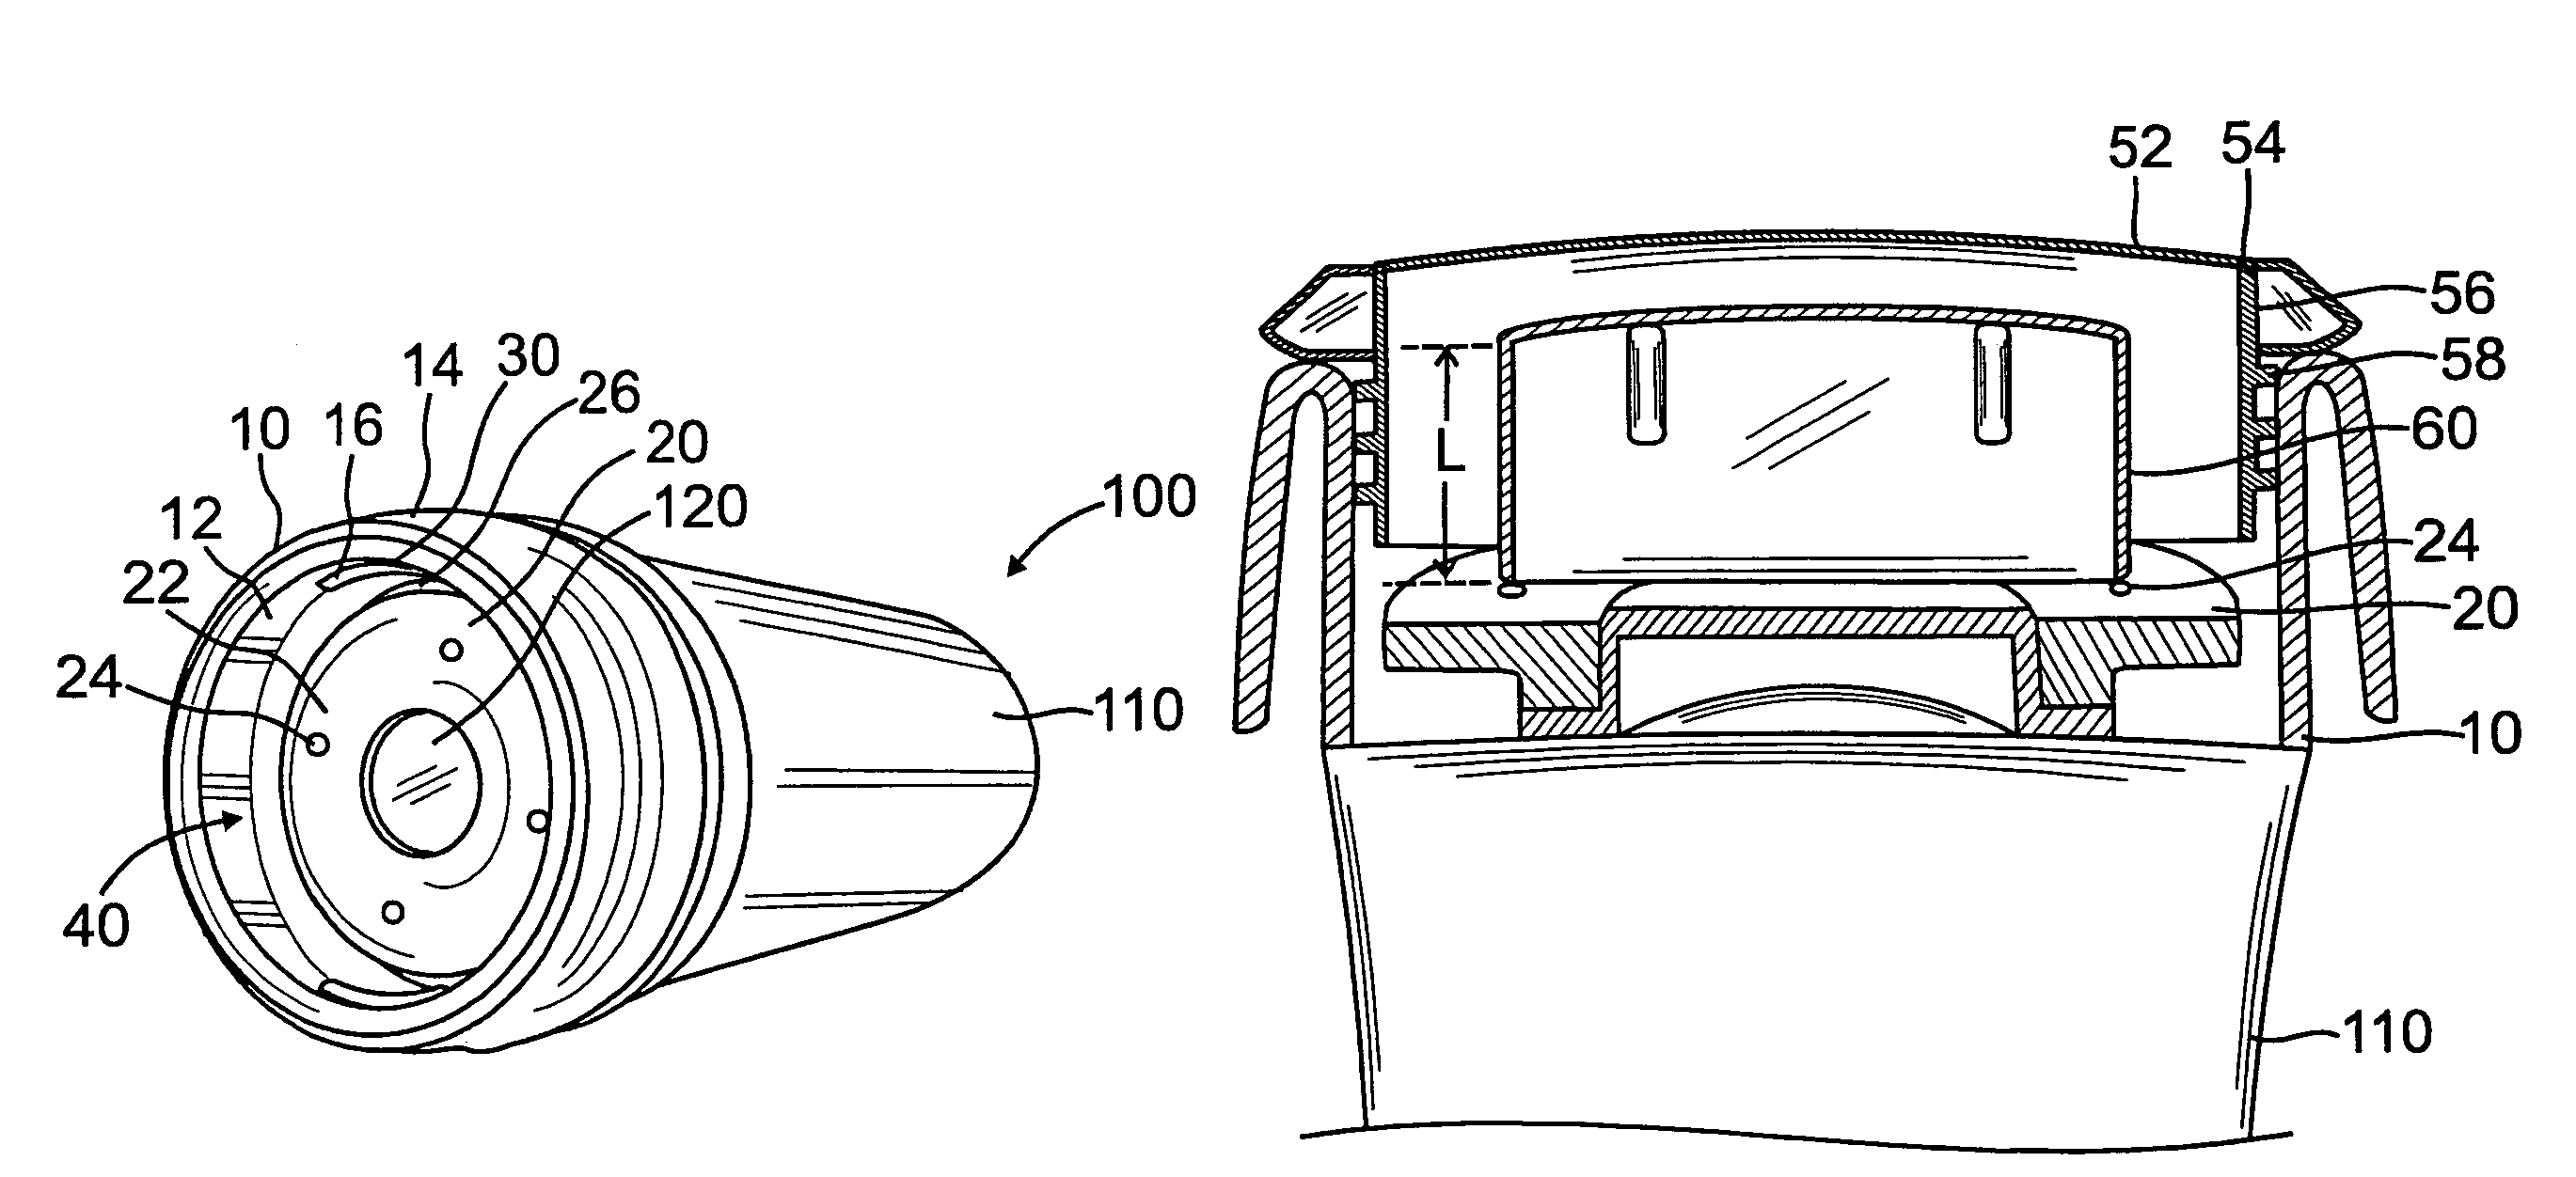 Thermos with beverage consumption apparatus which enables liquid to be consumed directly from the thermos when a valve is opened